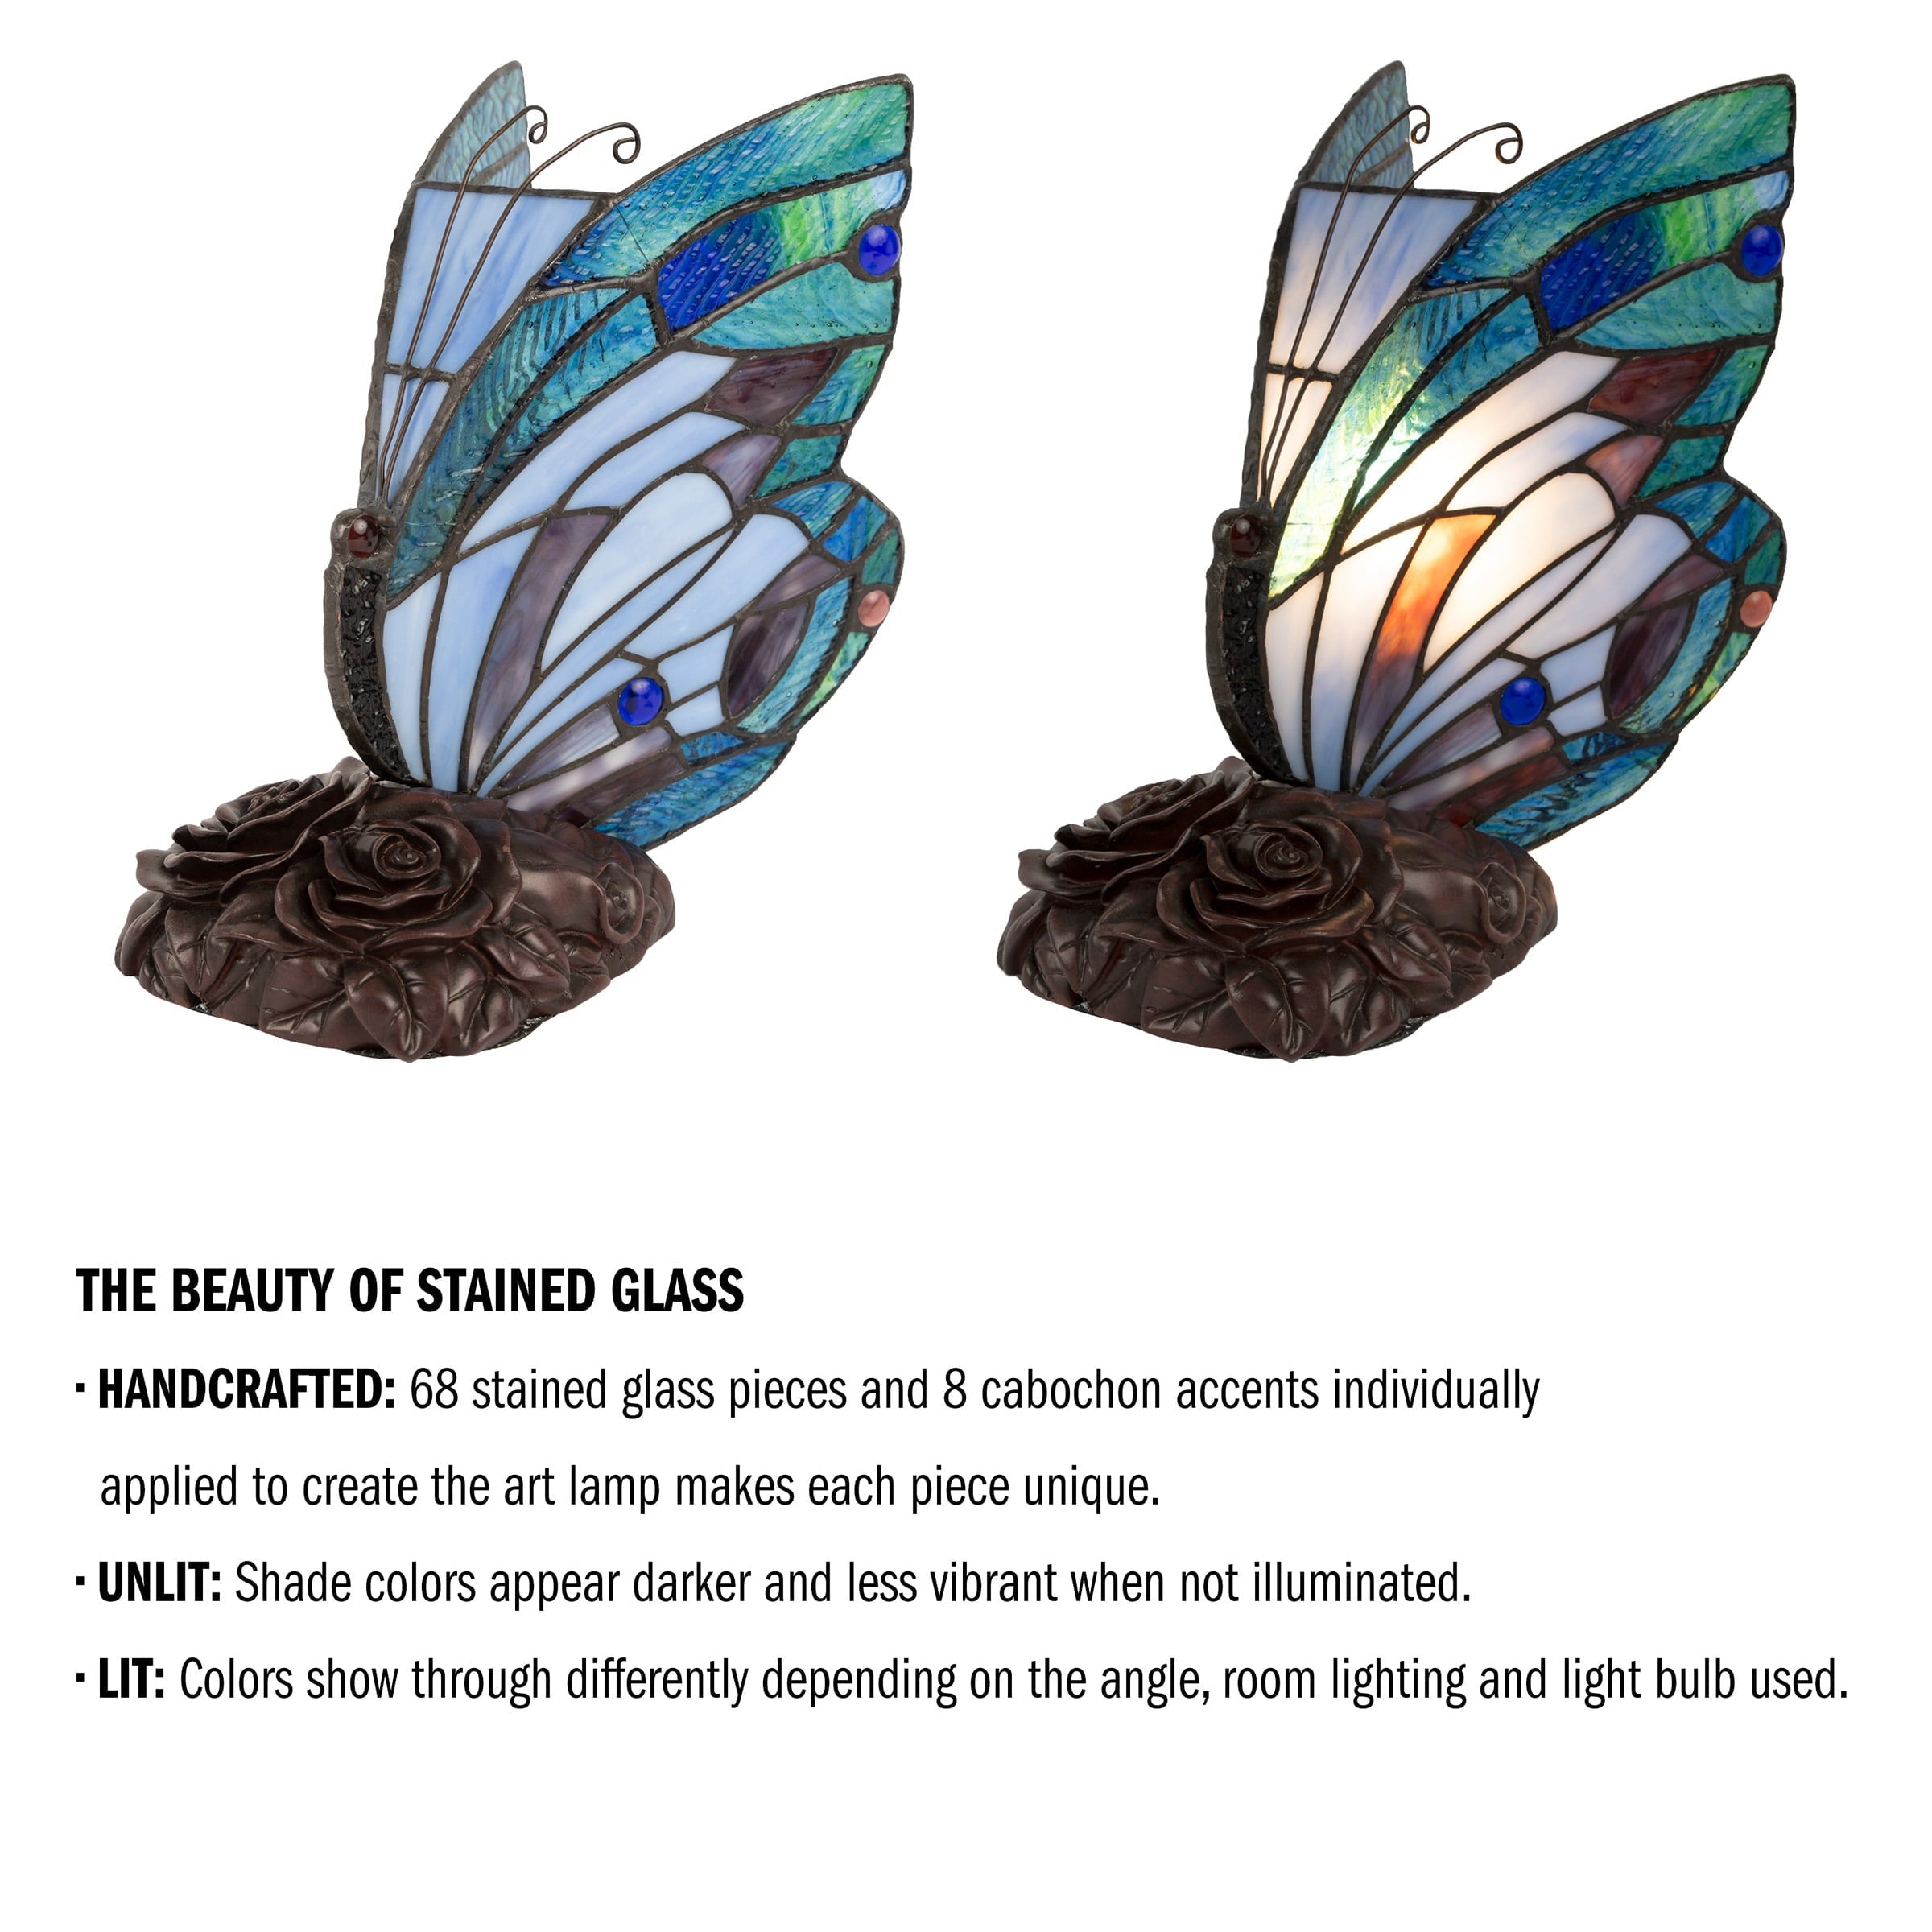  Style Butterfly Lamp-Stained Glass Table or Desk Light LED Bulb Included-Vintage Look Colorful Accent Décor by Lavish Home (Pointed Wings)